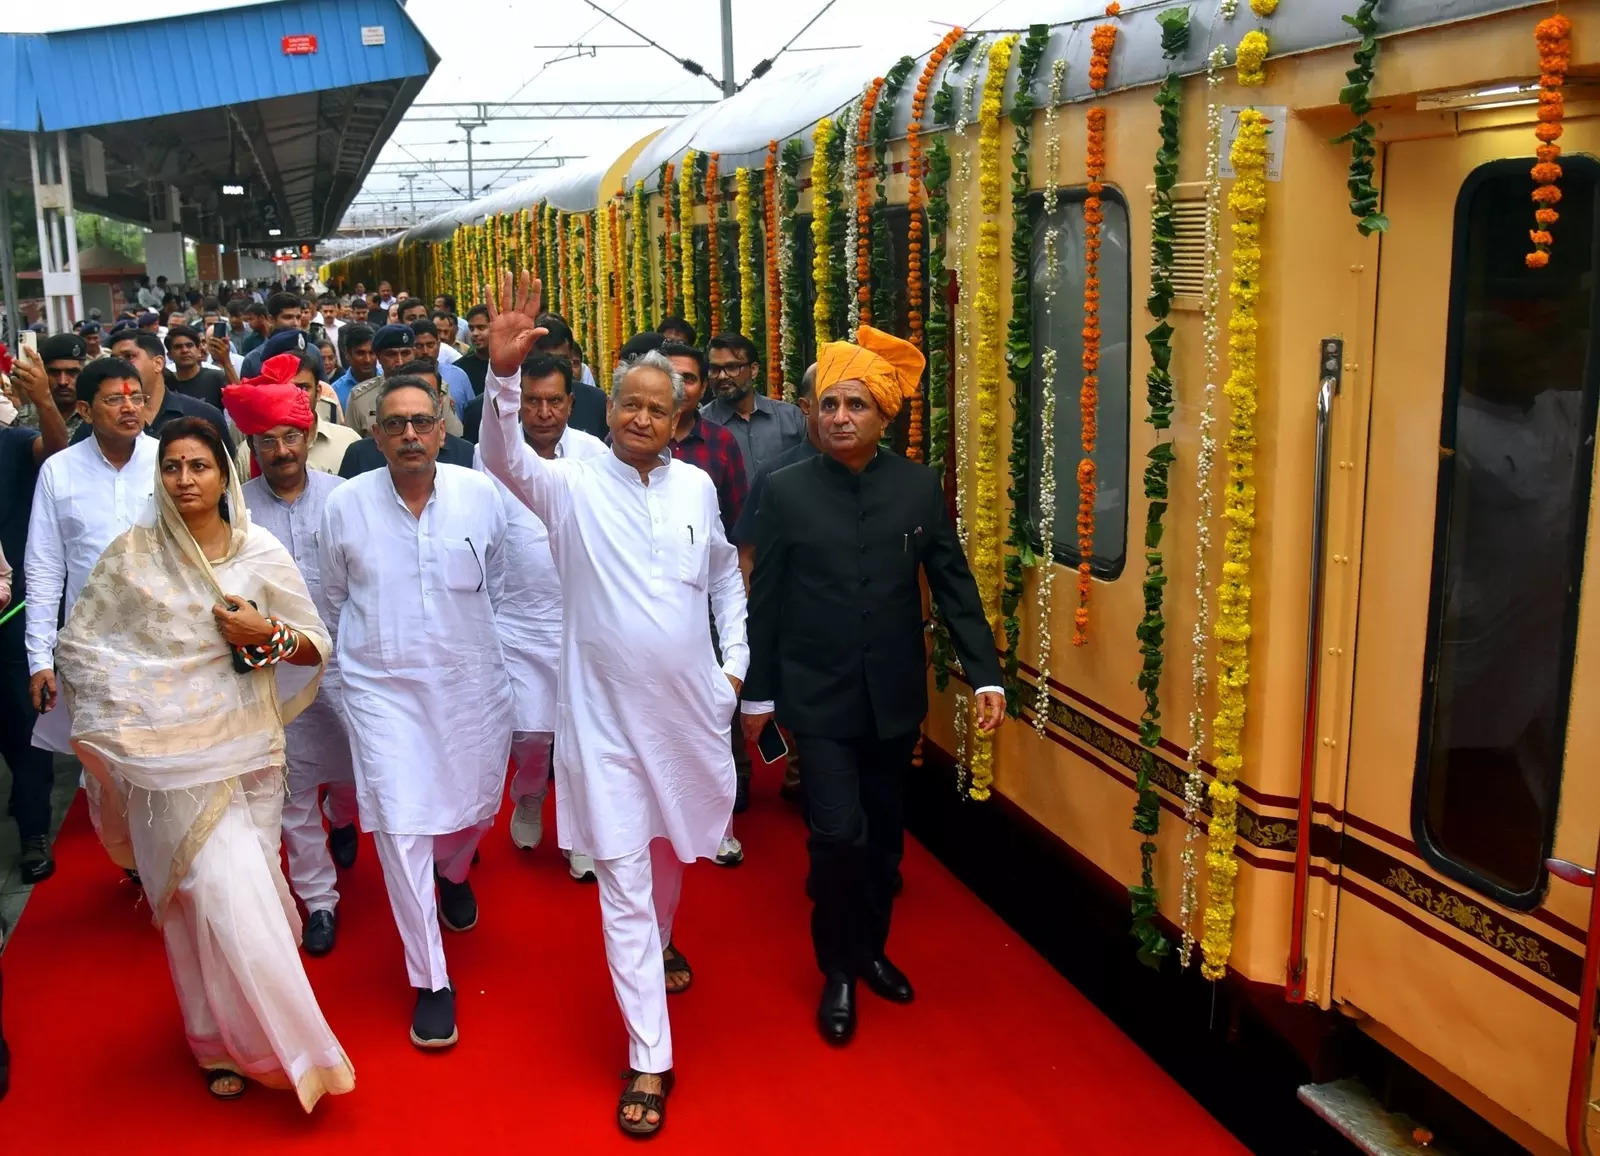  Jaipur: Rajasthan Chief Minister Ashok Gehlot flags off the The Palace on Wheels along with Tourism Minister Vishvendra Singh and Congress leader Shakuntala Rawat, RTDC Chairman Dharmendra Rathore and others, in Jaipur on October 08, 2022. (Photo:Ravi shankar vyas/IANS)